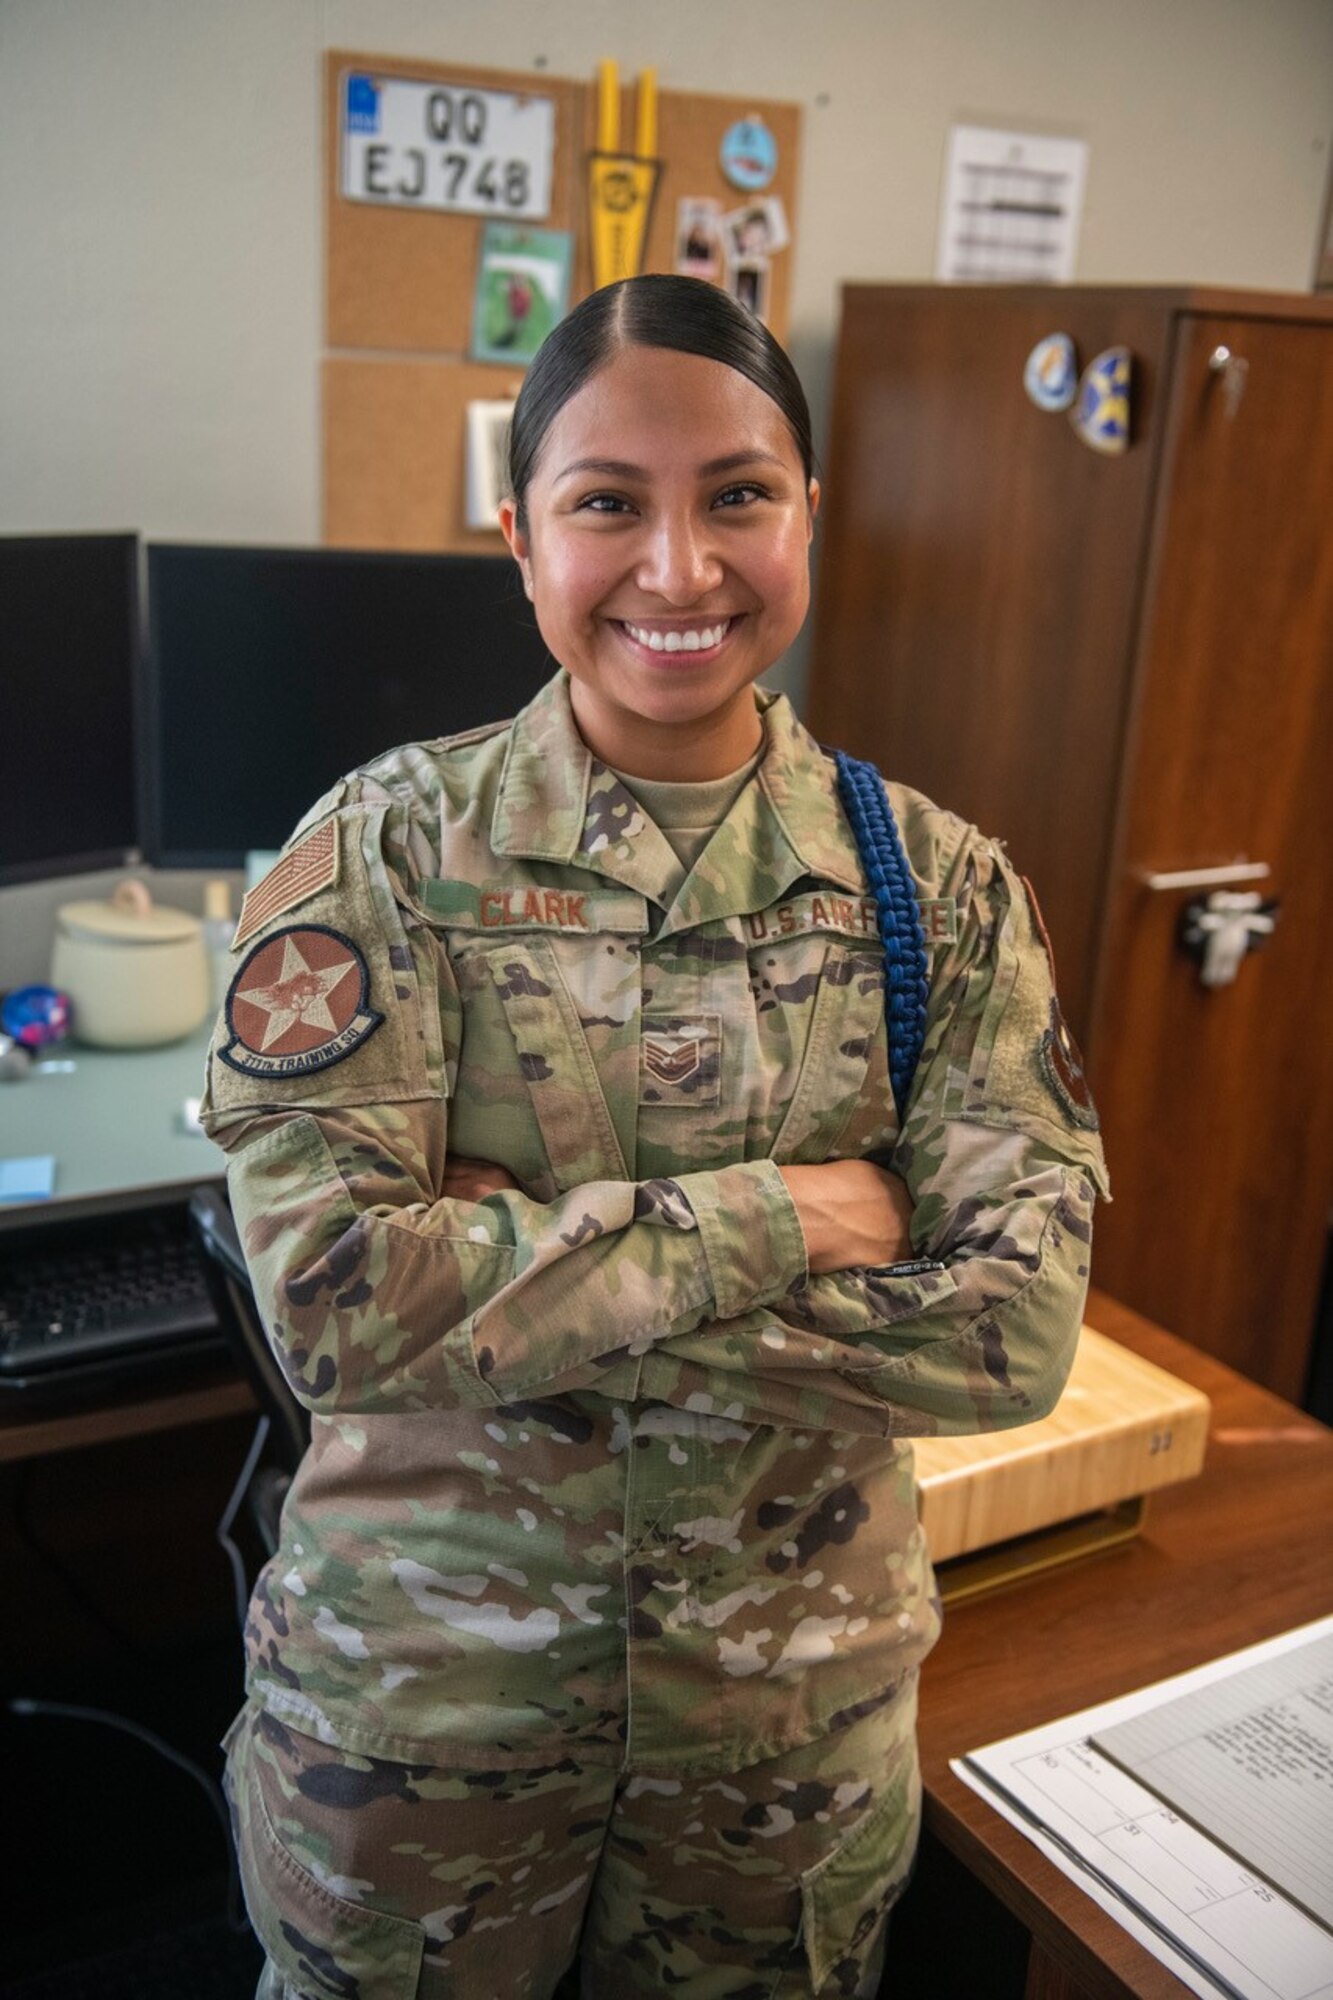 U.S. Air Force Staff Sgt. Karely Clark, 311th Training Squadron military training leader, stands at her desk at Presidio of Monterey, Calif., Oct. 5, 2022. Clark takes inspiration from Puerto Rican rapper Benito Antonio Martinez Ocasio or as he is most known, Bad Bunny, and his message of challenging negative gender roles in Hispanic culture. (DoD photo by Leo Carrillo)